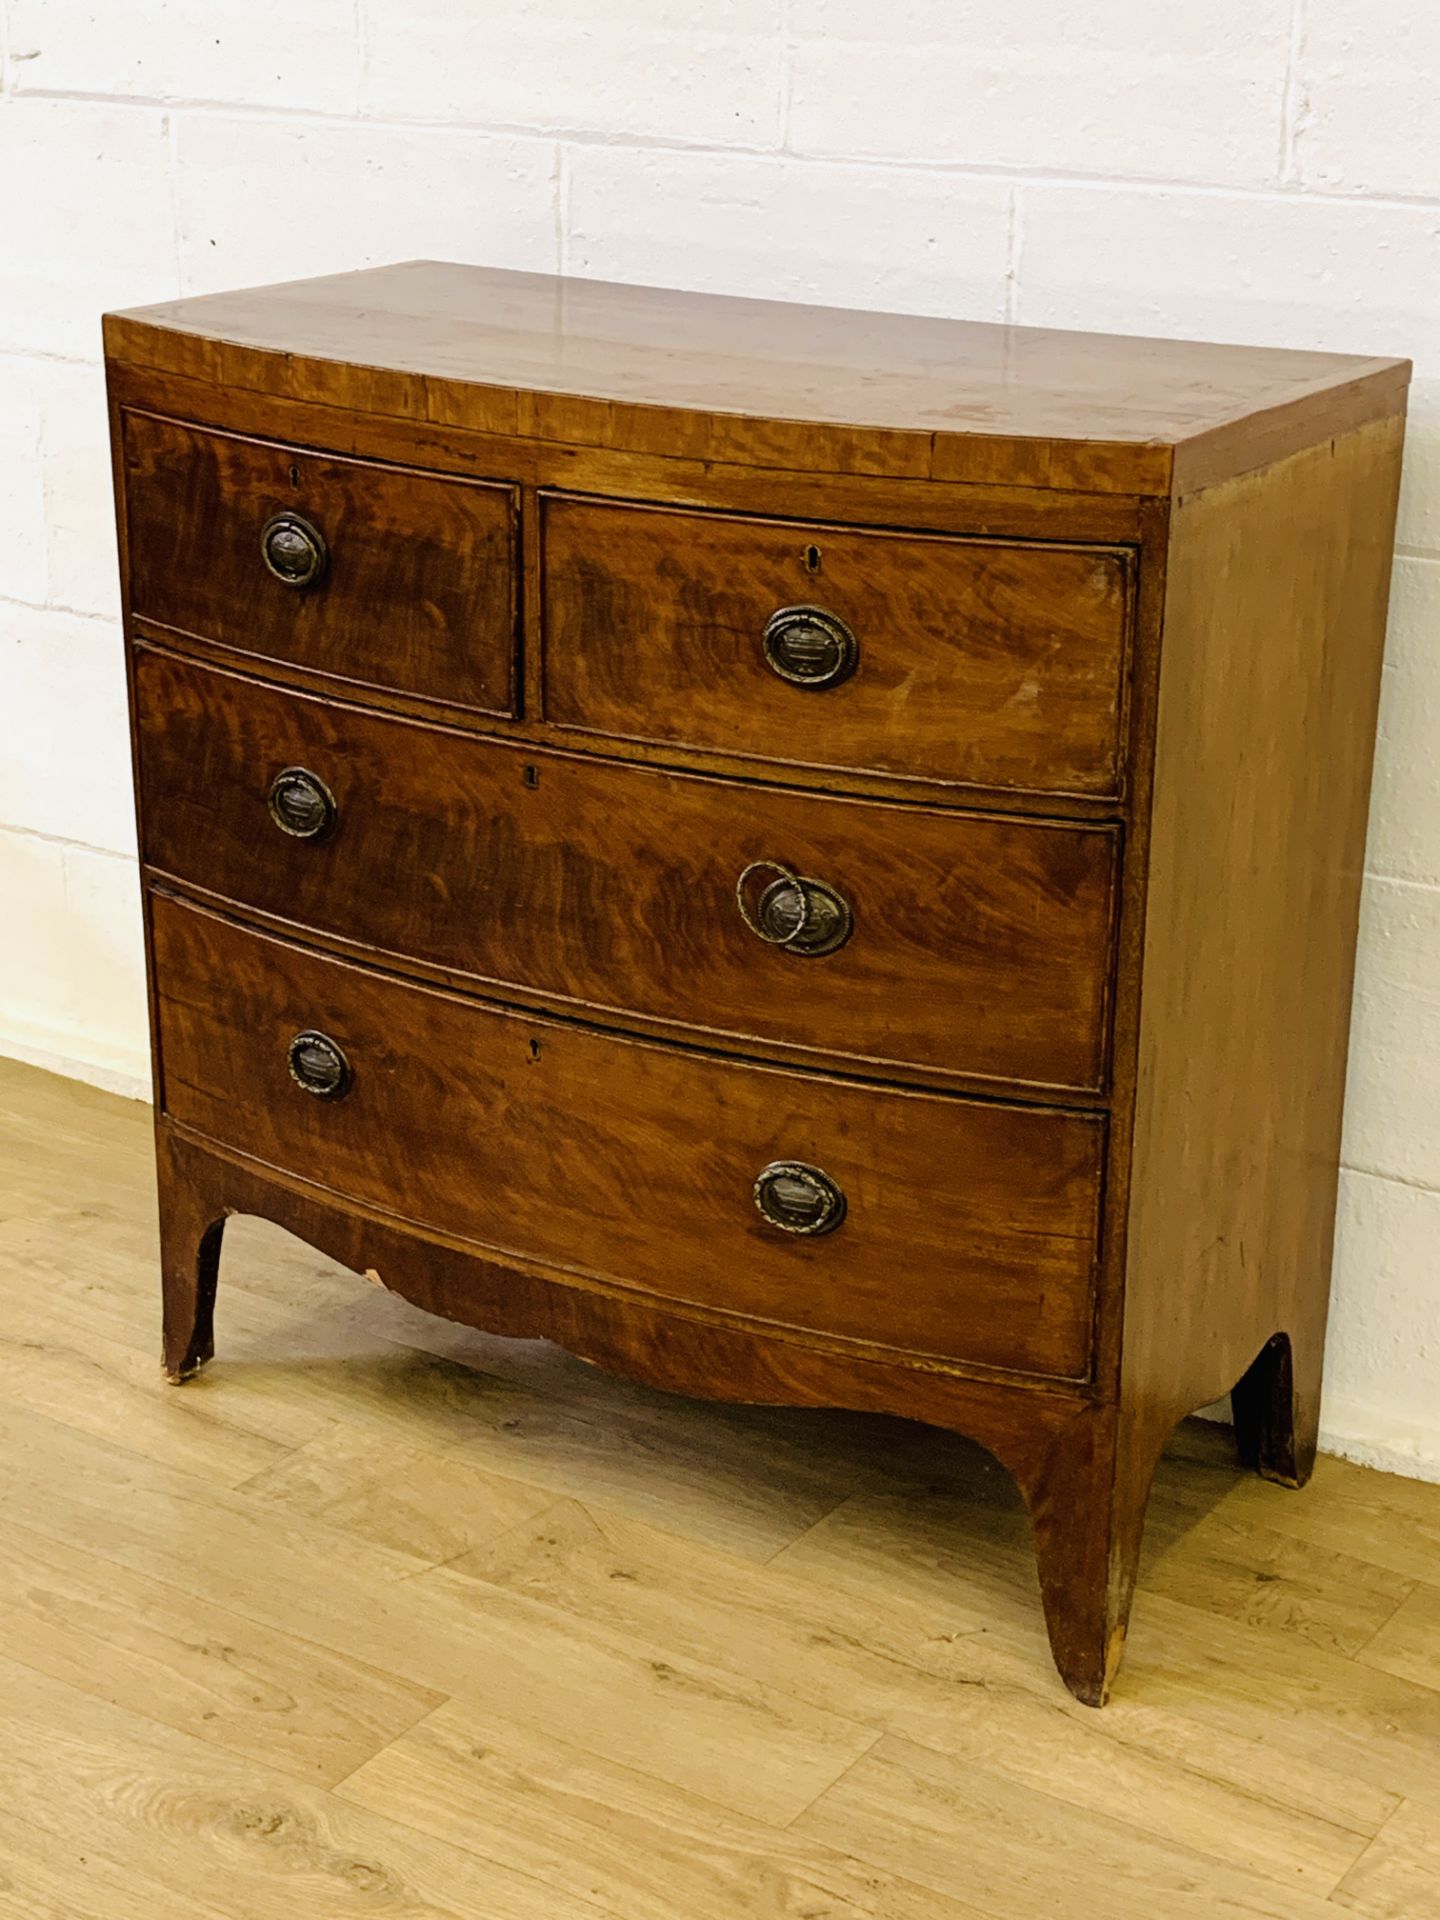 Mahogany chest of drawers - Image 3 of 8